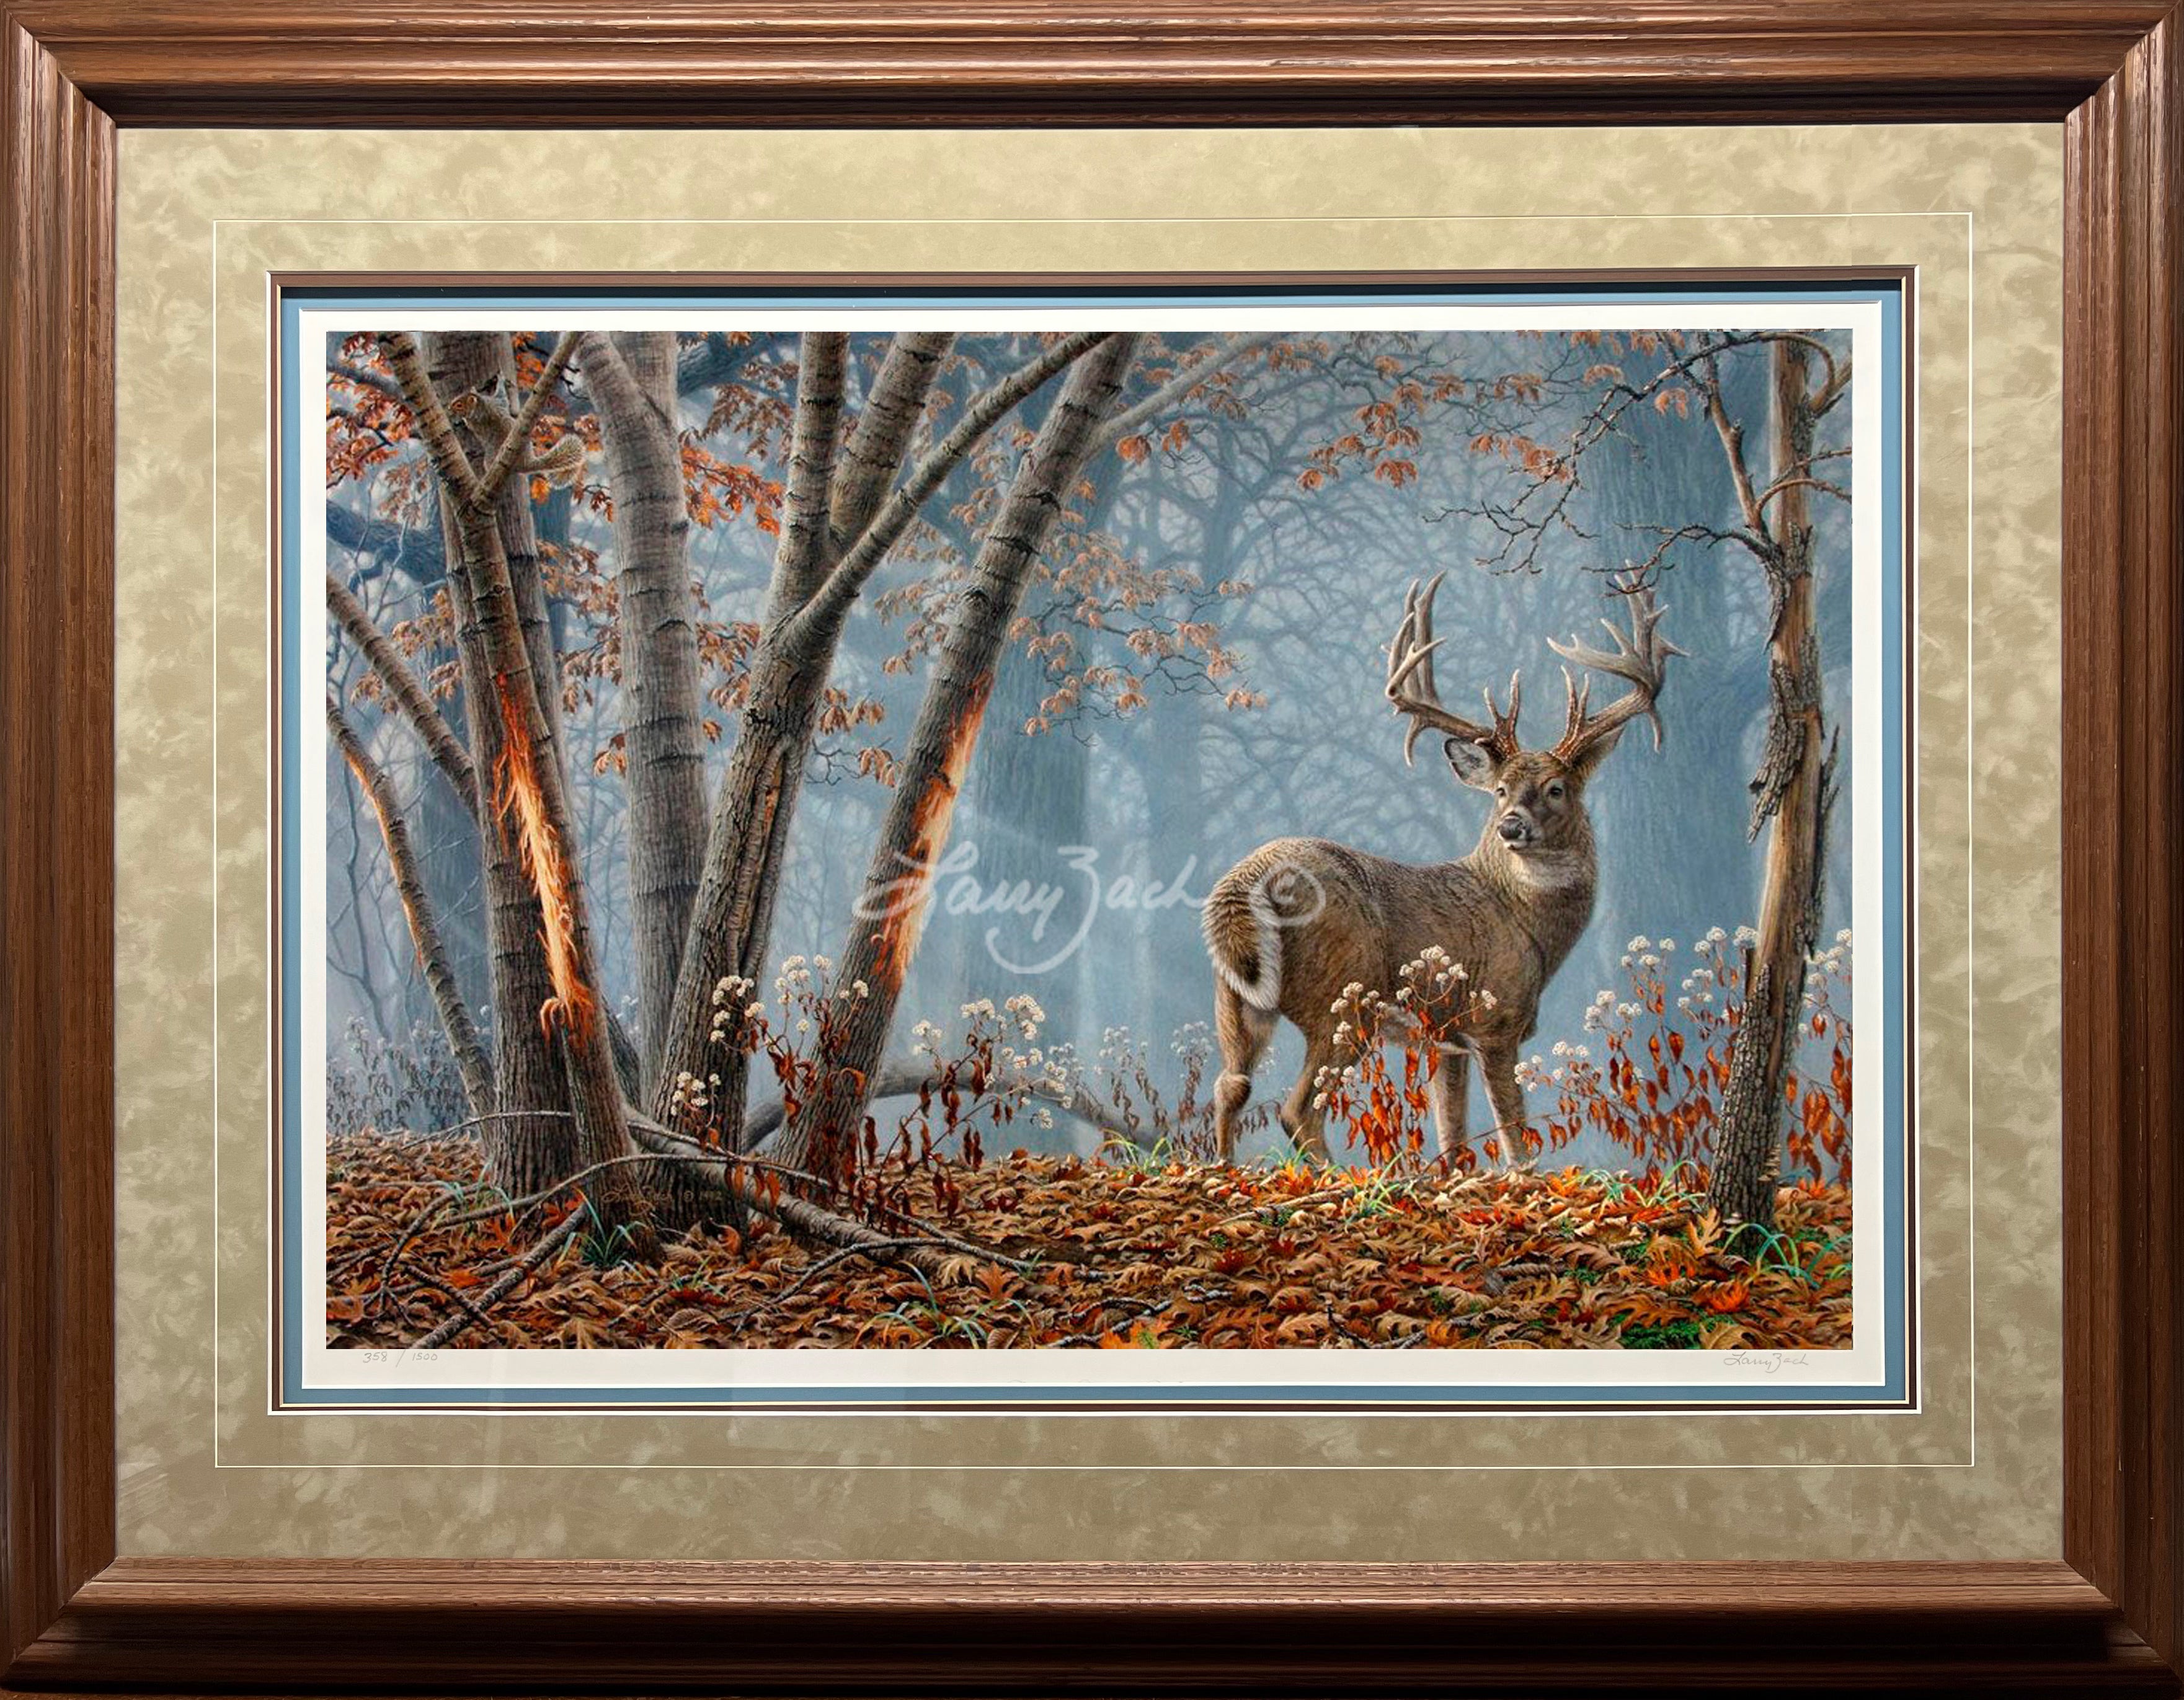 Secondary Market Limited Edition Paper Print Framed